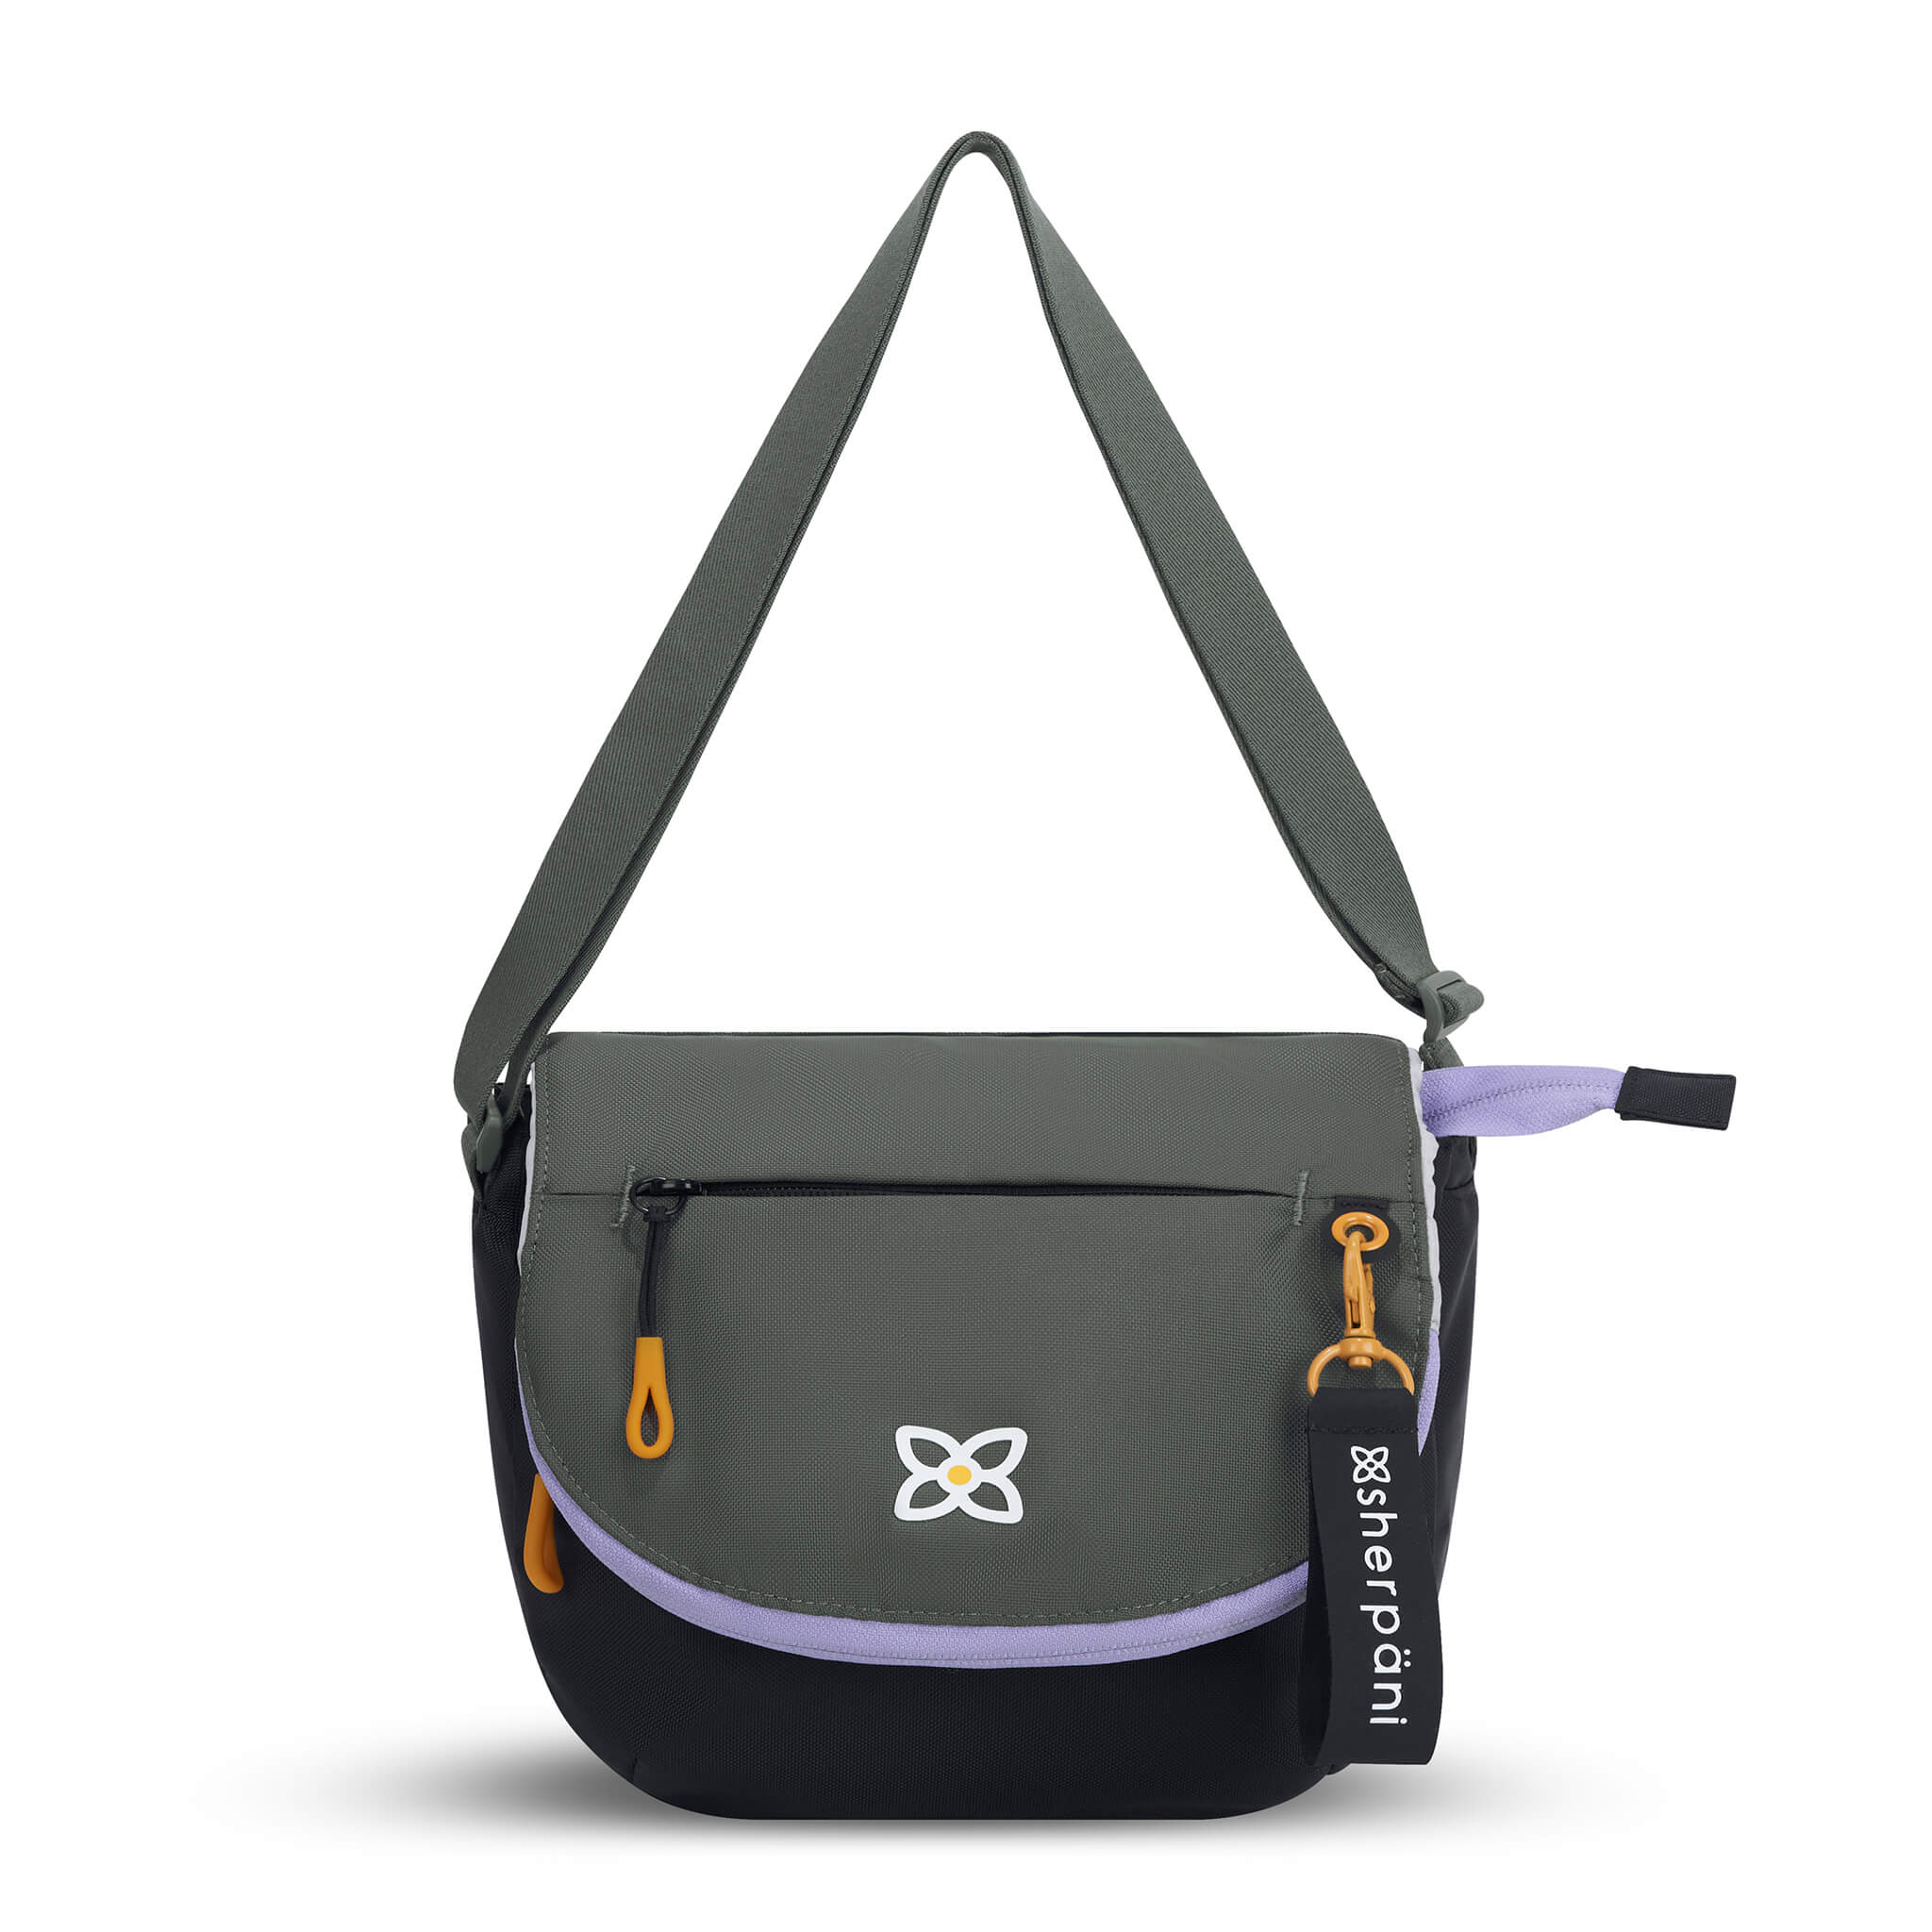 Flat front view of Sherpani messenger satchel bag, the Milli in Juniper. Milli features include an adjustable crossbody strap, front zipper pocket, brimmed zipper pocket, detachable keychain, magnetic closure, RFID security and multiple internal pockets for organization. The Juniper color is two-toned in black and gray with accents in yellow and purple. 